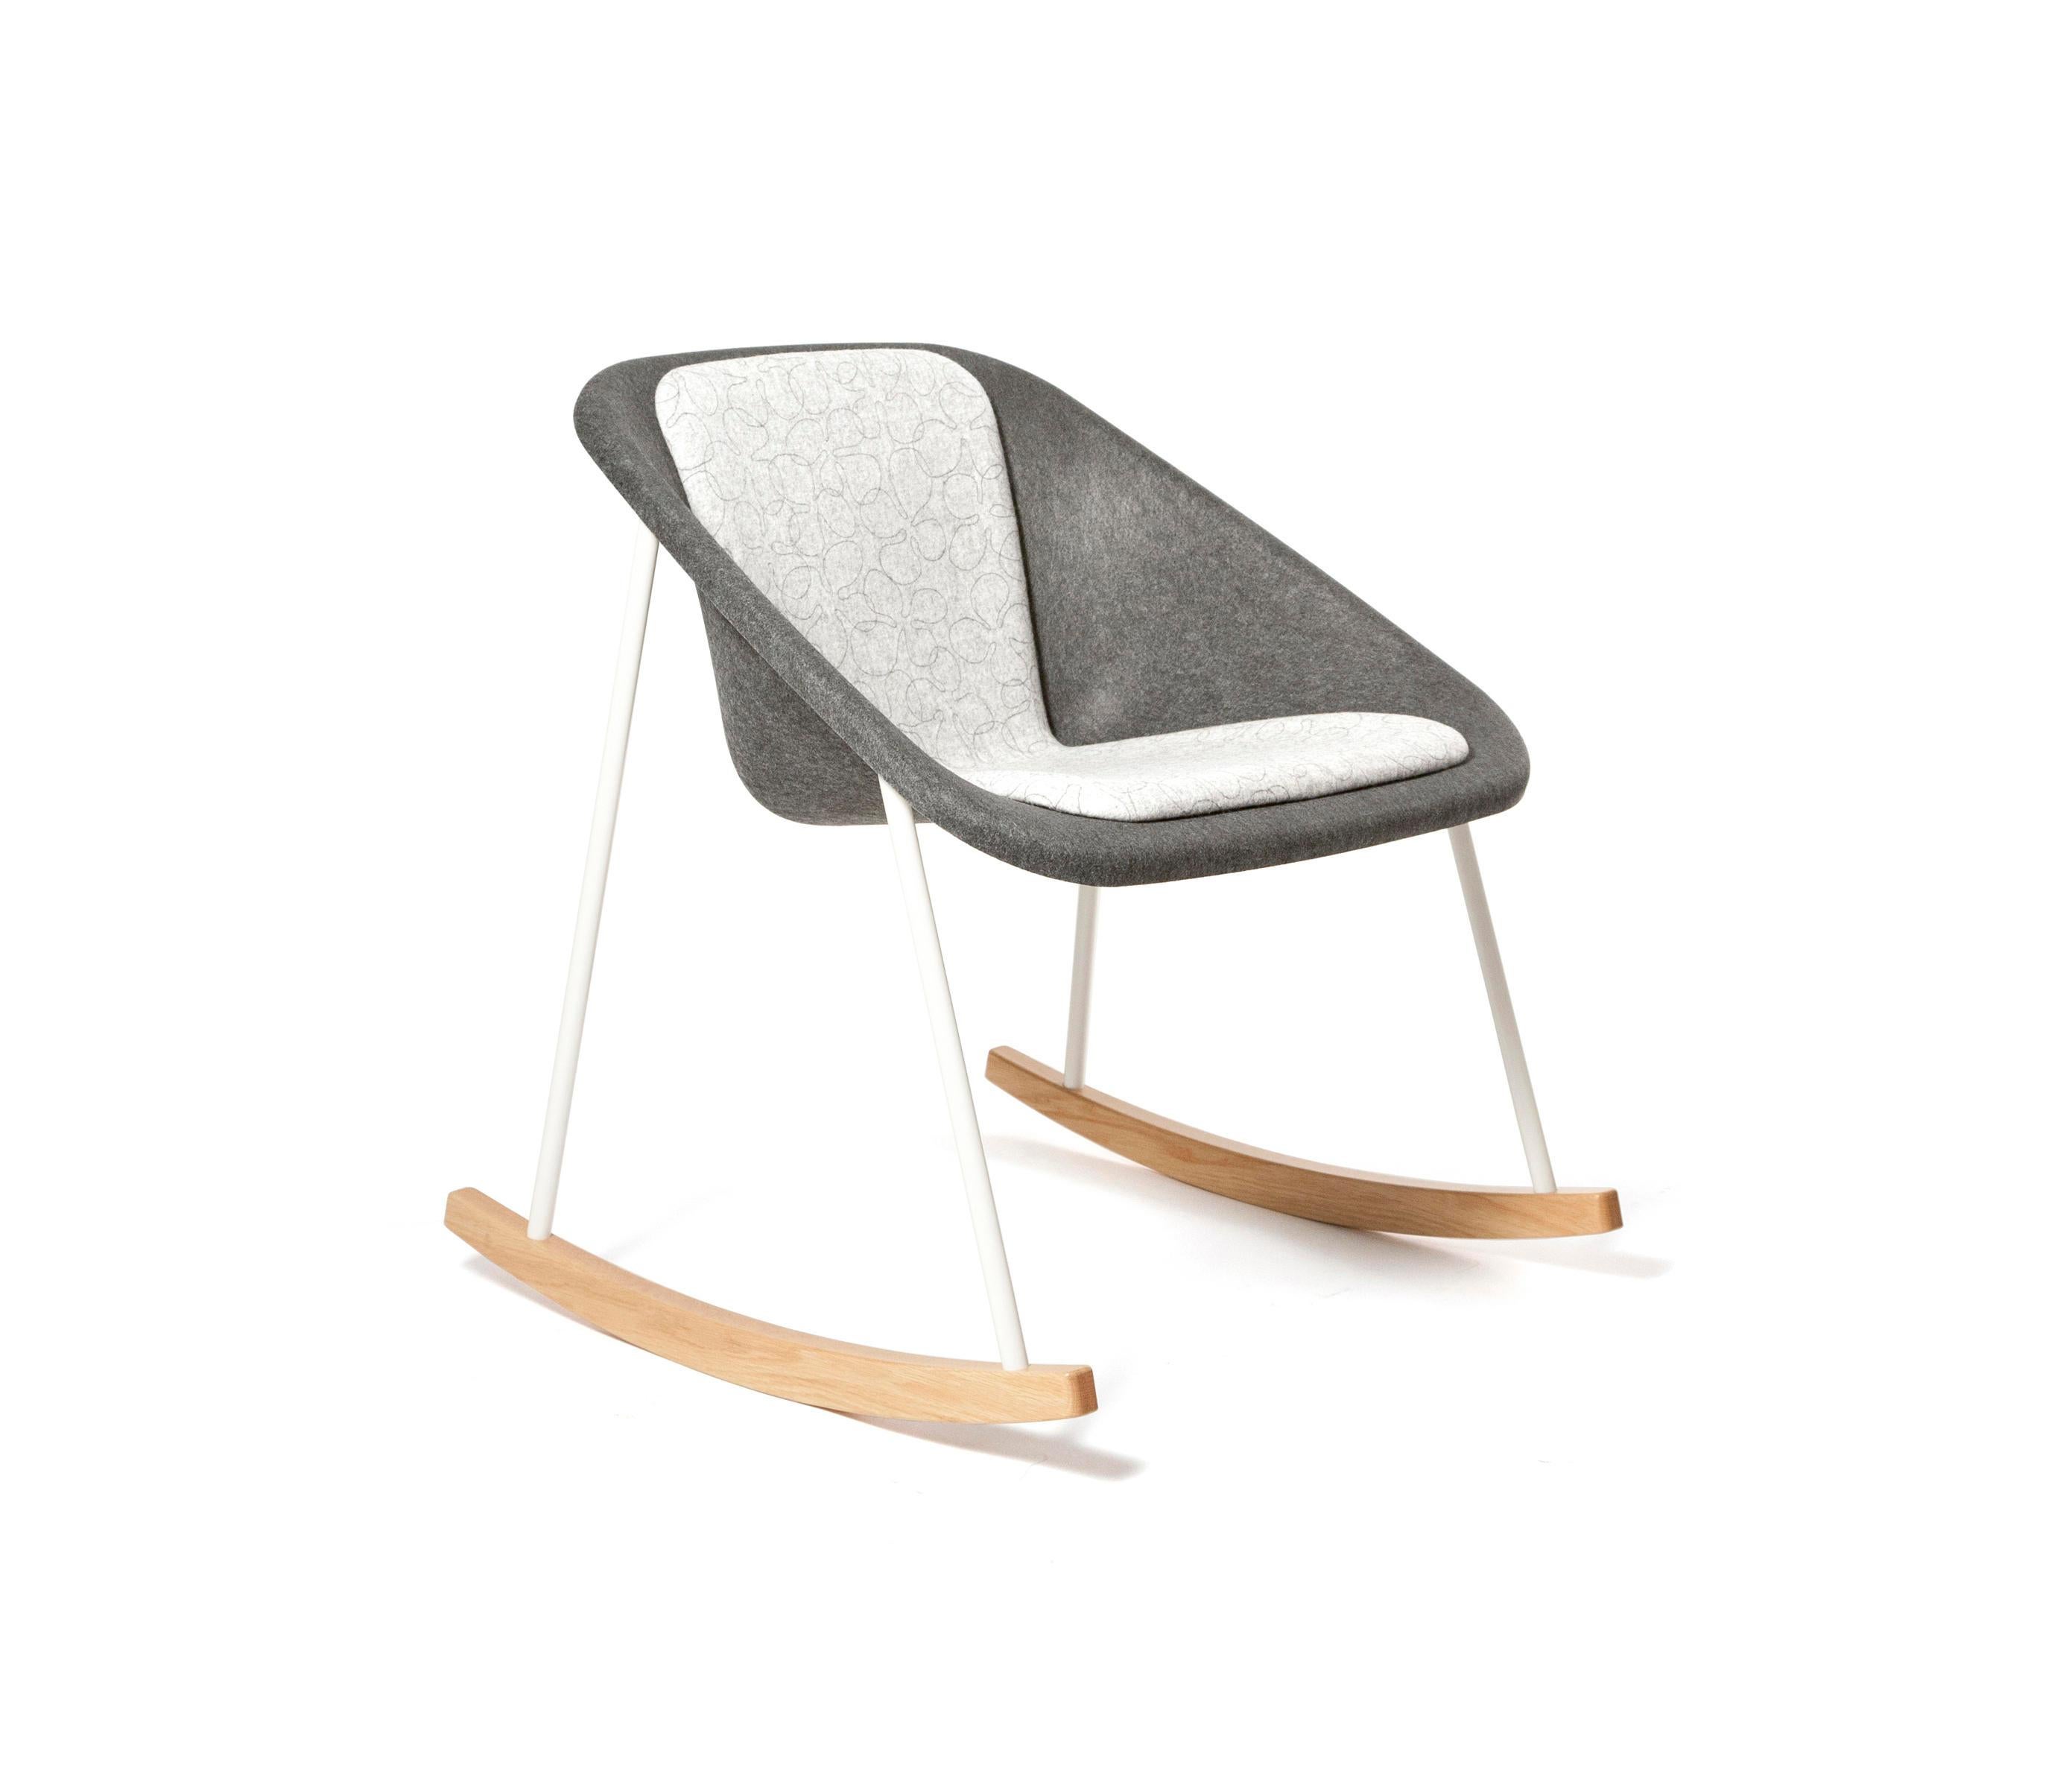 Kola Rocking Chair combines the ingenious felt seat with strong steel frame and wooden rockers. This combination of materials allows the chair to offer superb comfort, light weight and durability to lobbies, lounges and waiting areas.

Kola is a